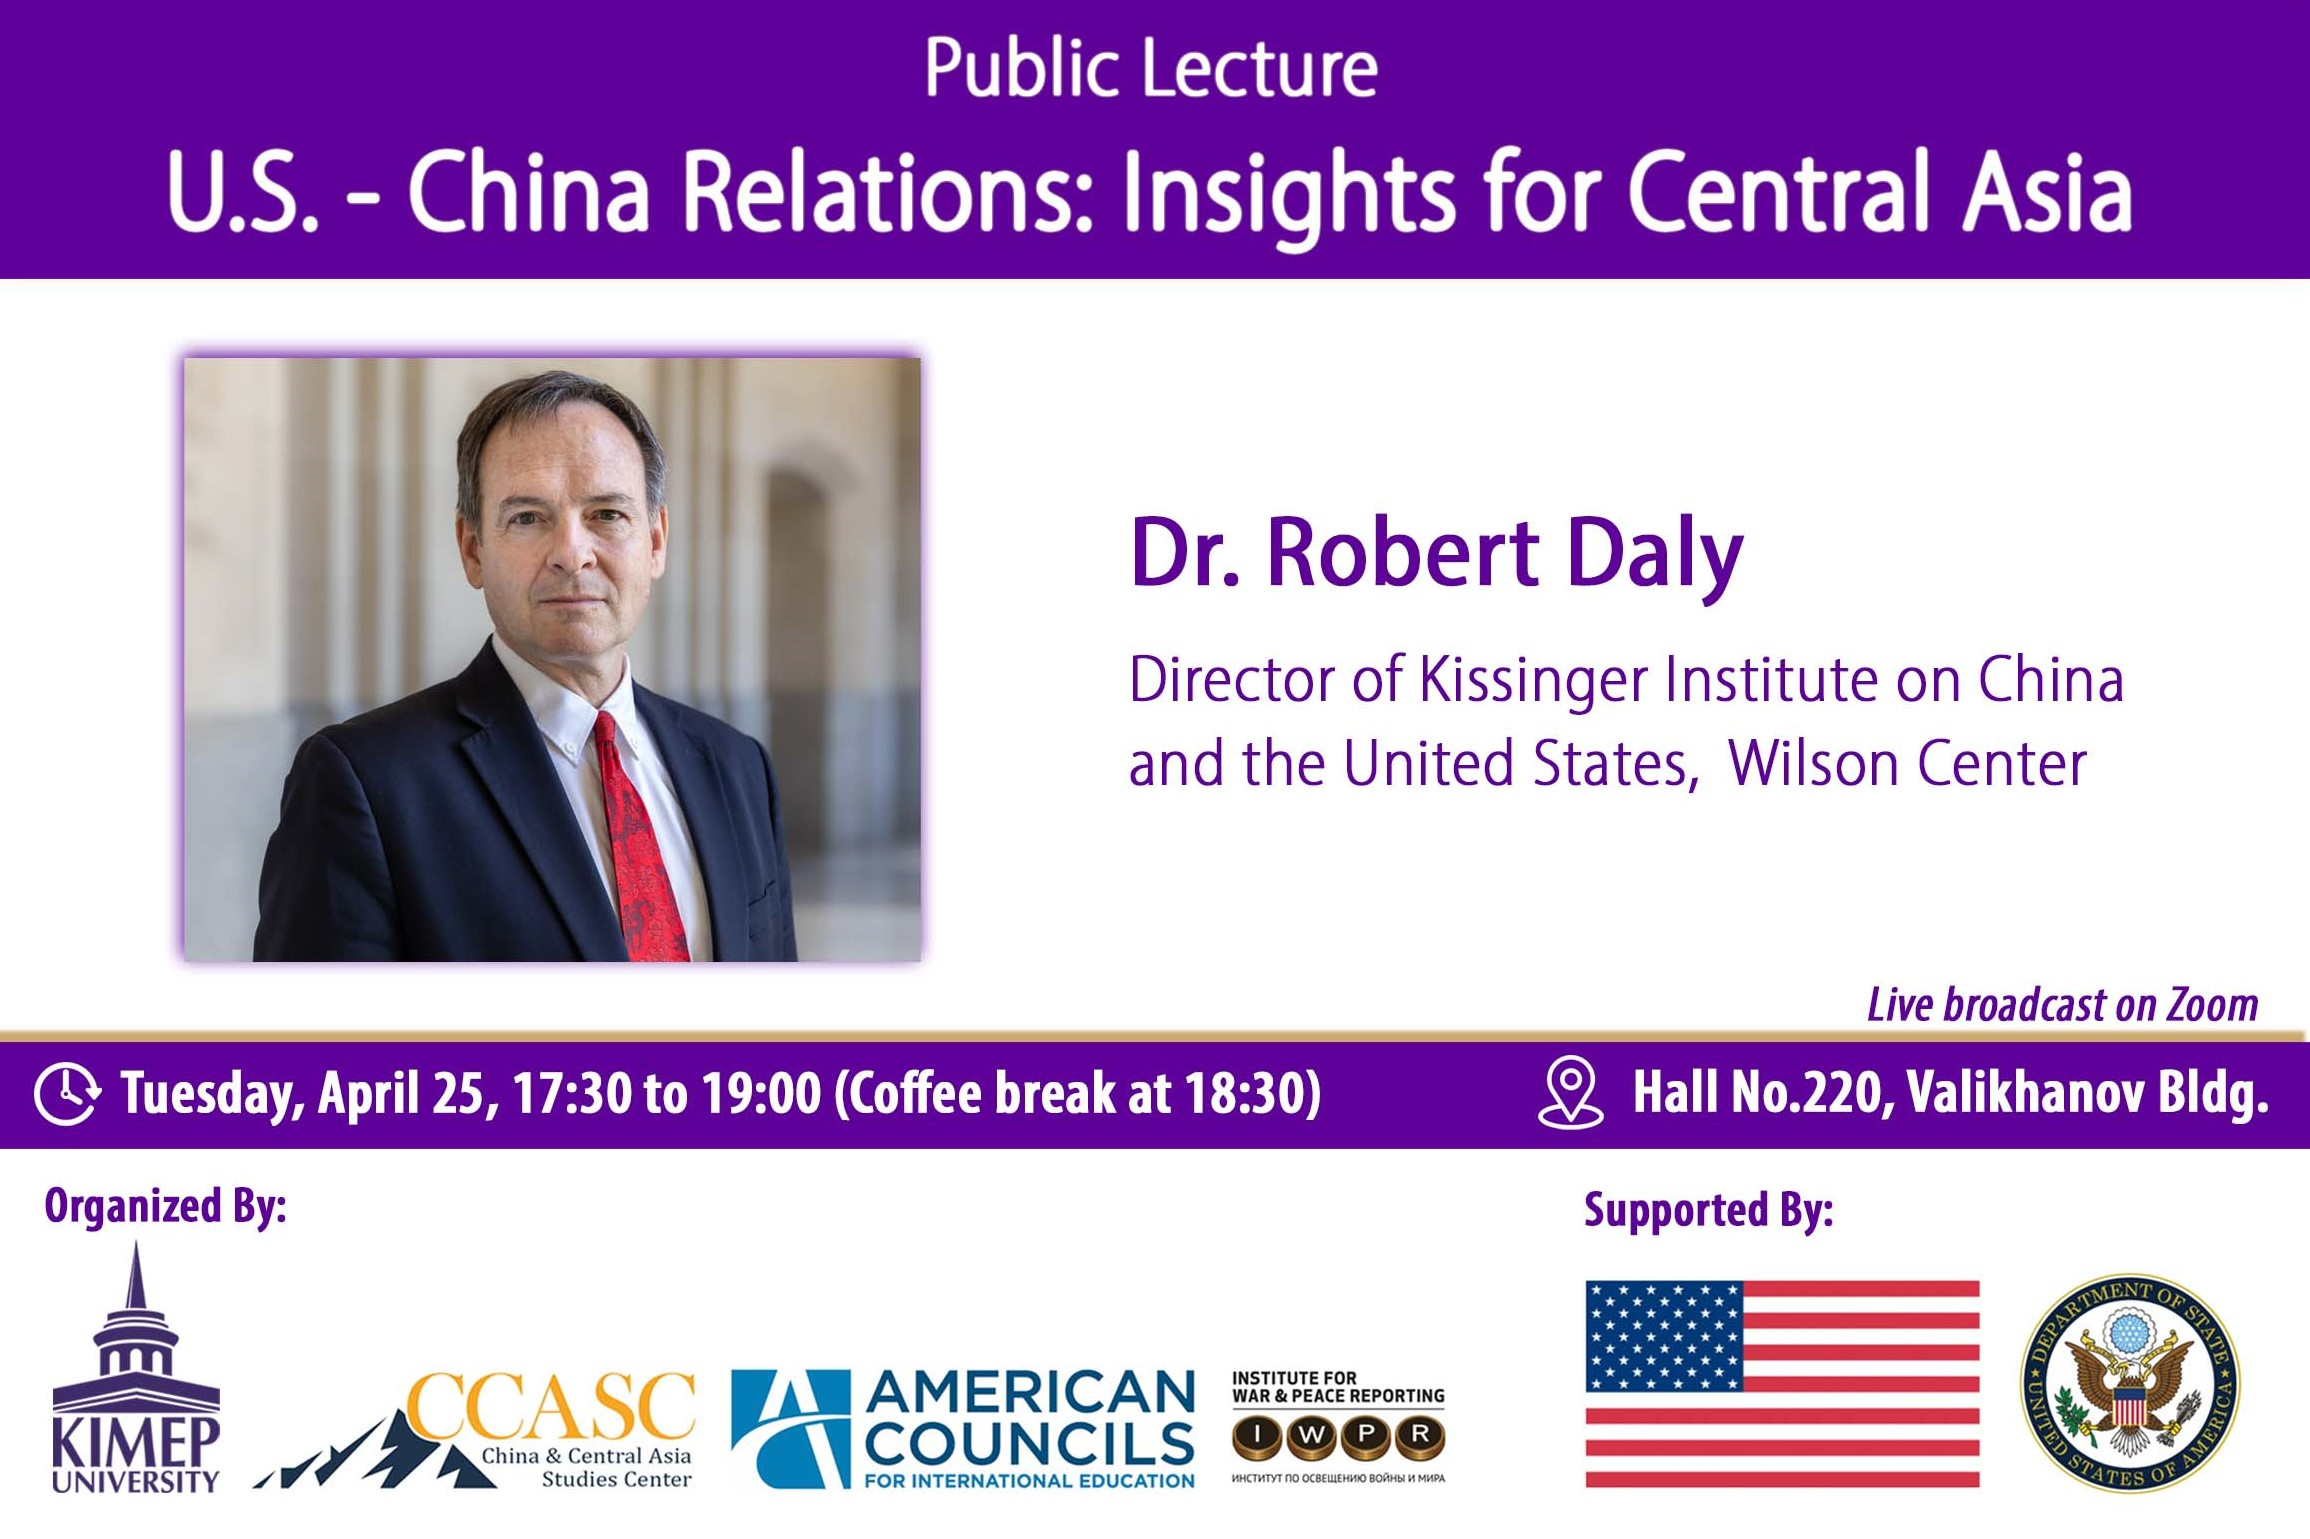 U.S. - China Relations: Insights for Central Asia